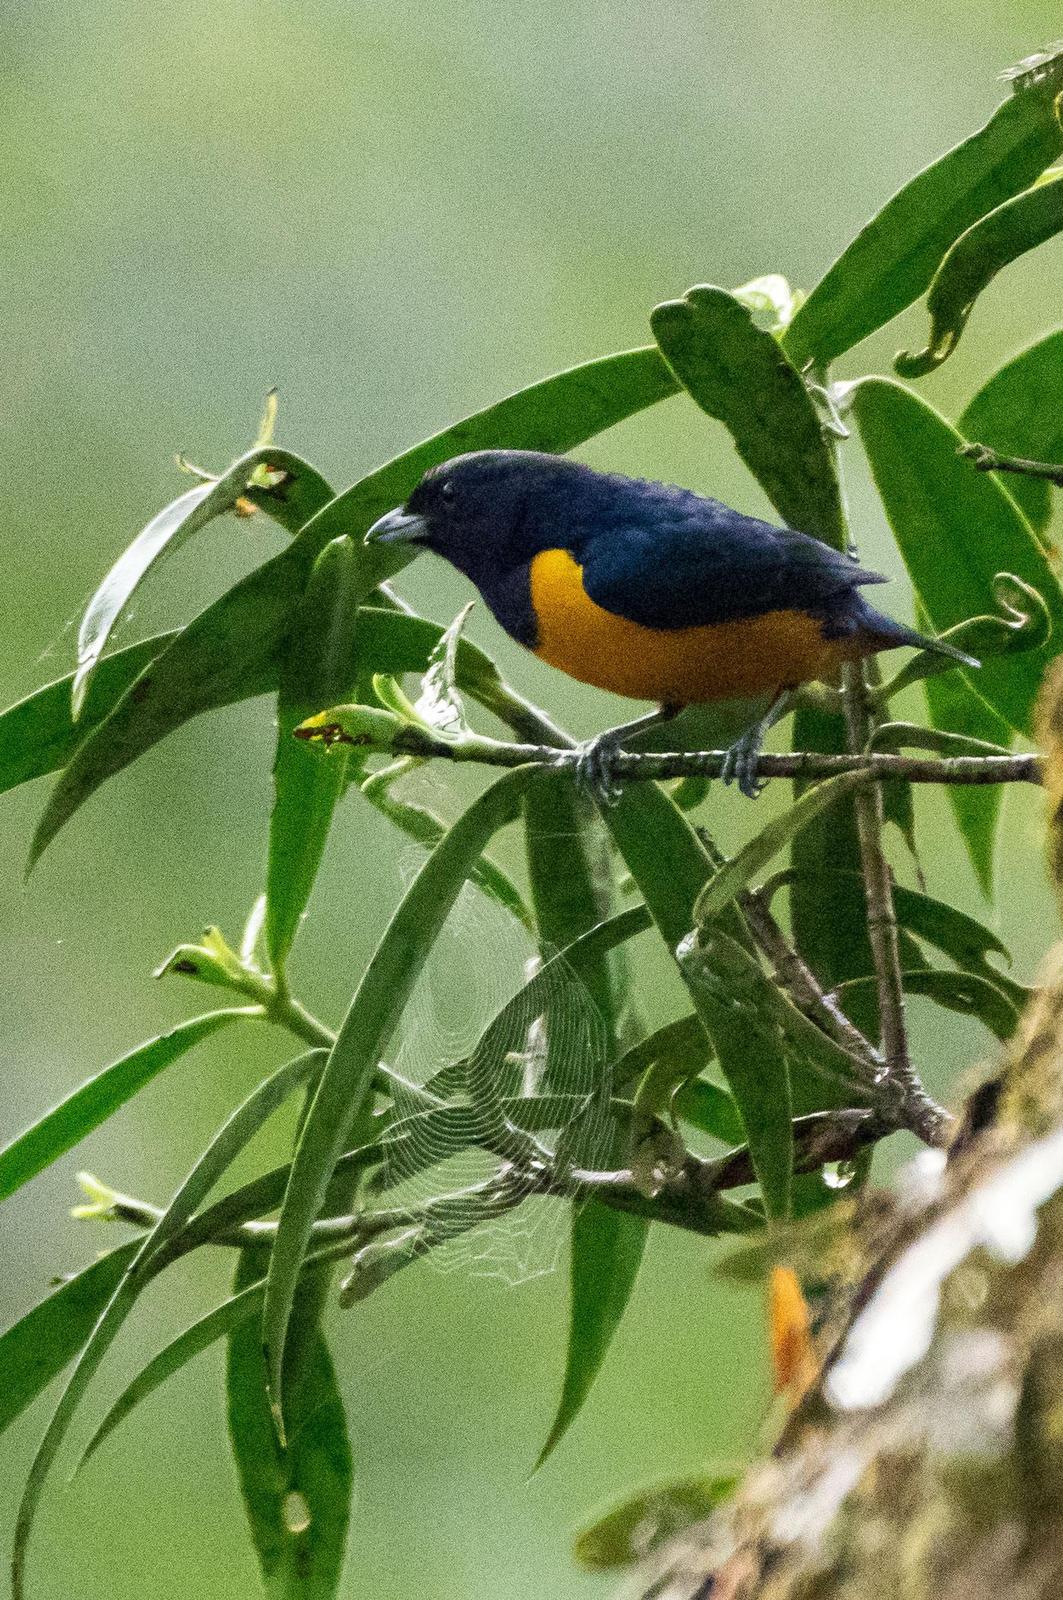 Rufous-bellied Euphonia Photo by Phil Kahler